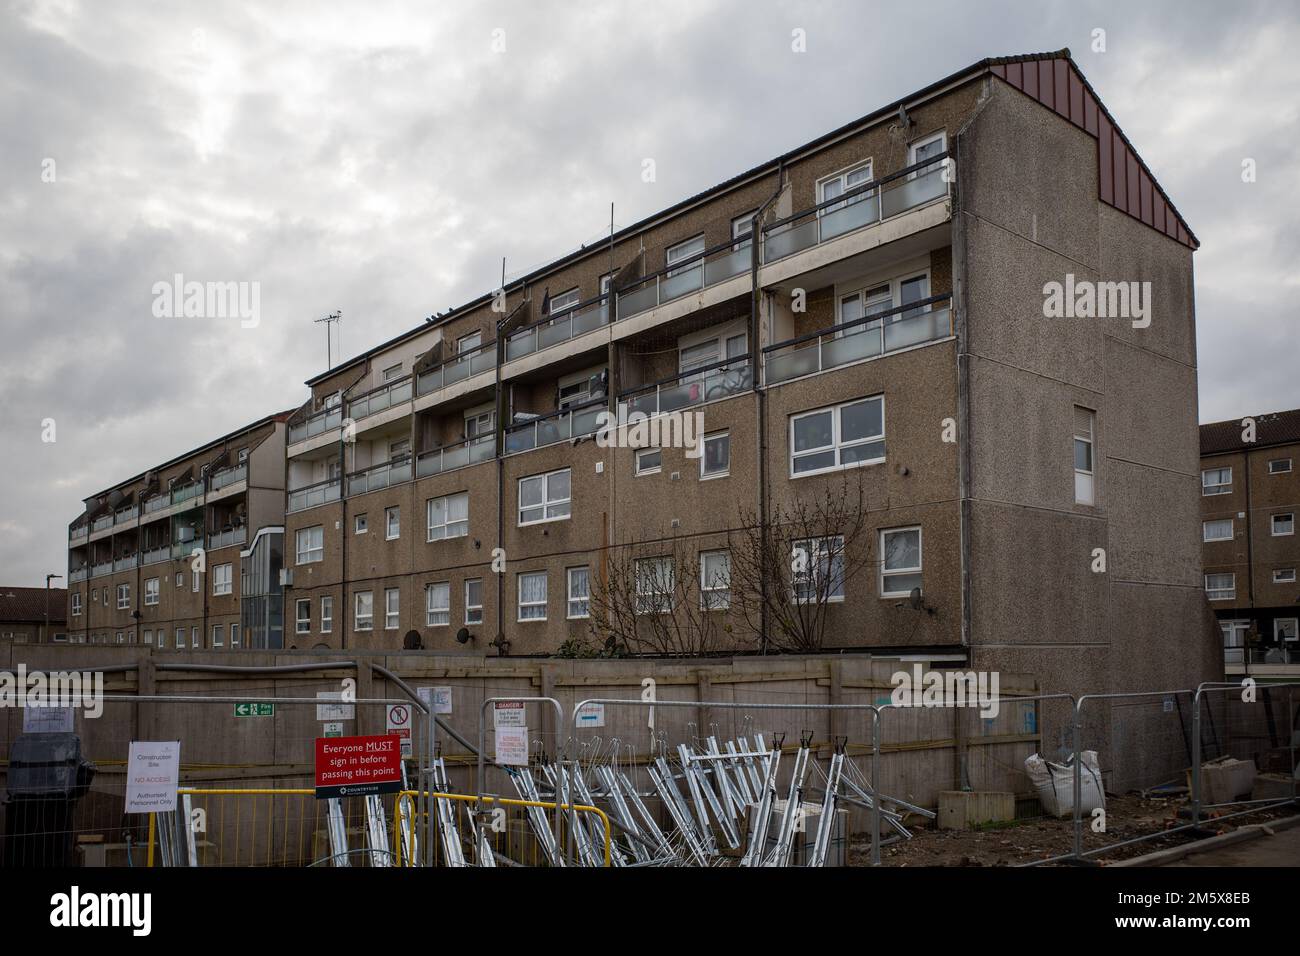 Dollis Valley Housing Estate built in the 1960's & 70's, situated near High Barnet, North London, undergoing redevelopment. Post War London Housing. Stock Photo